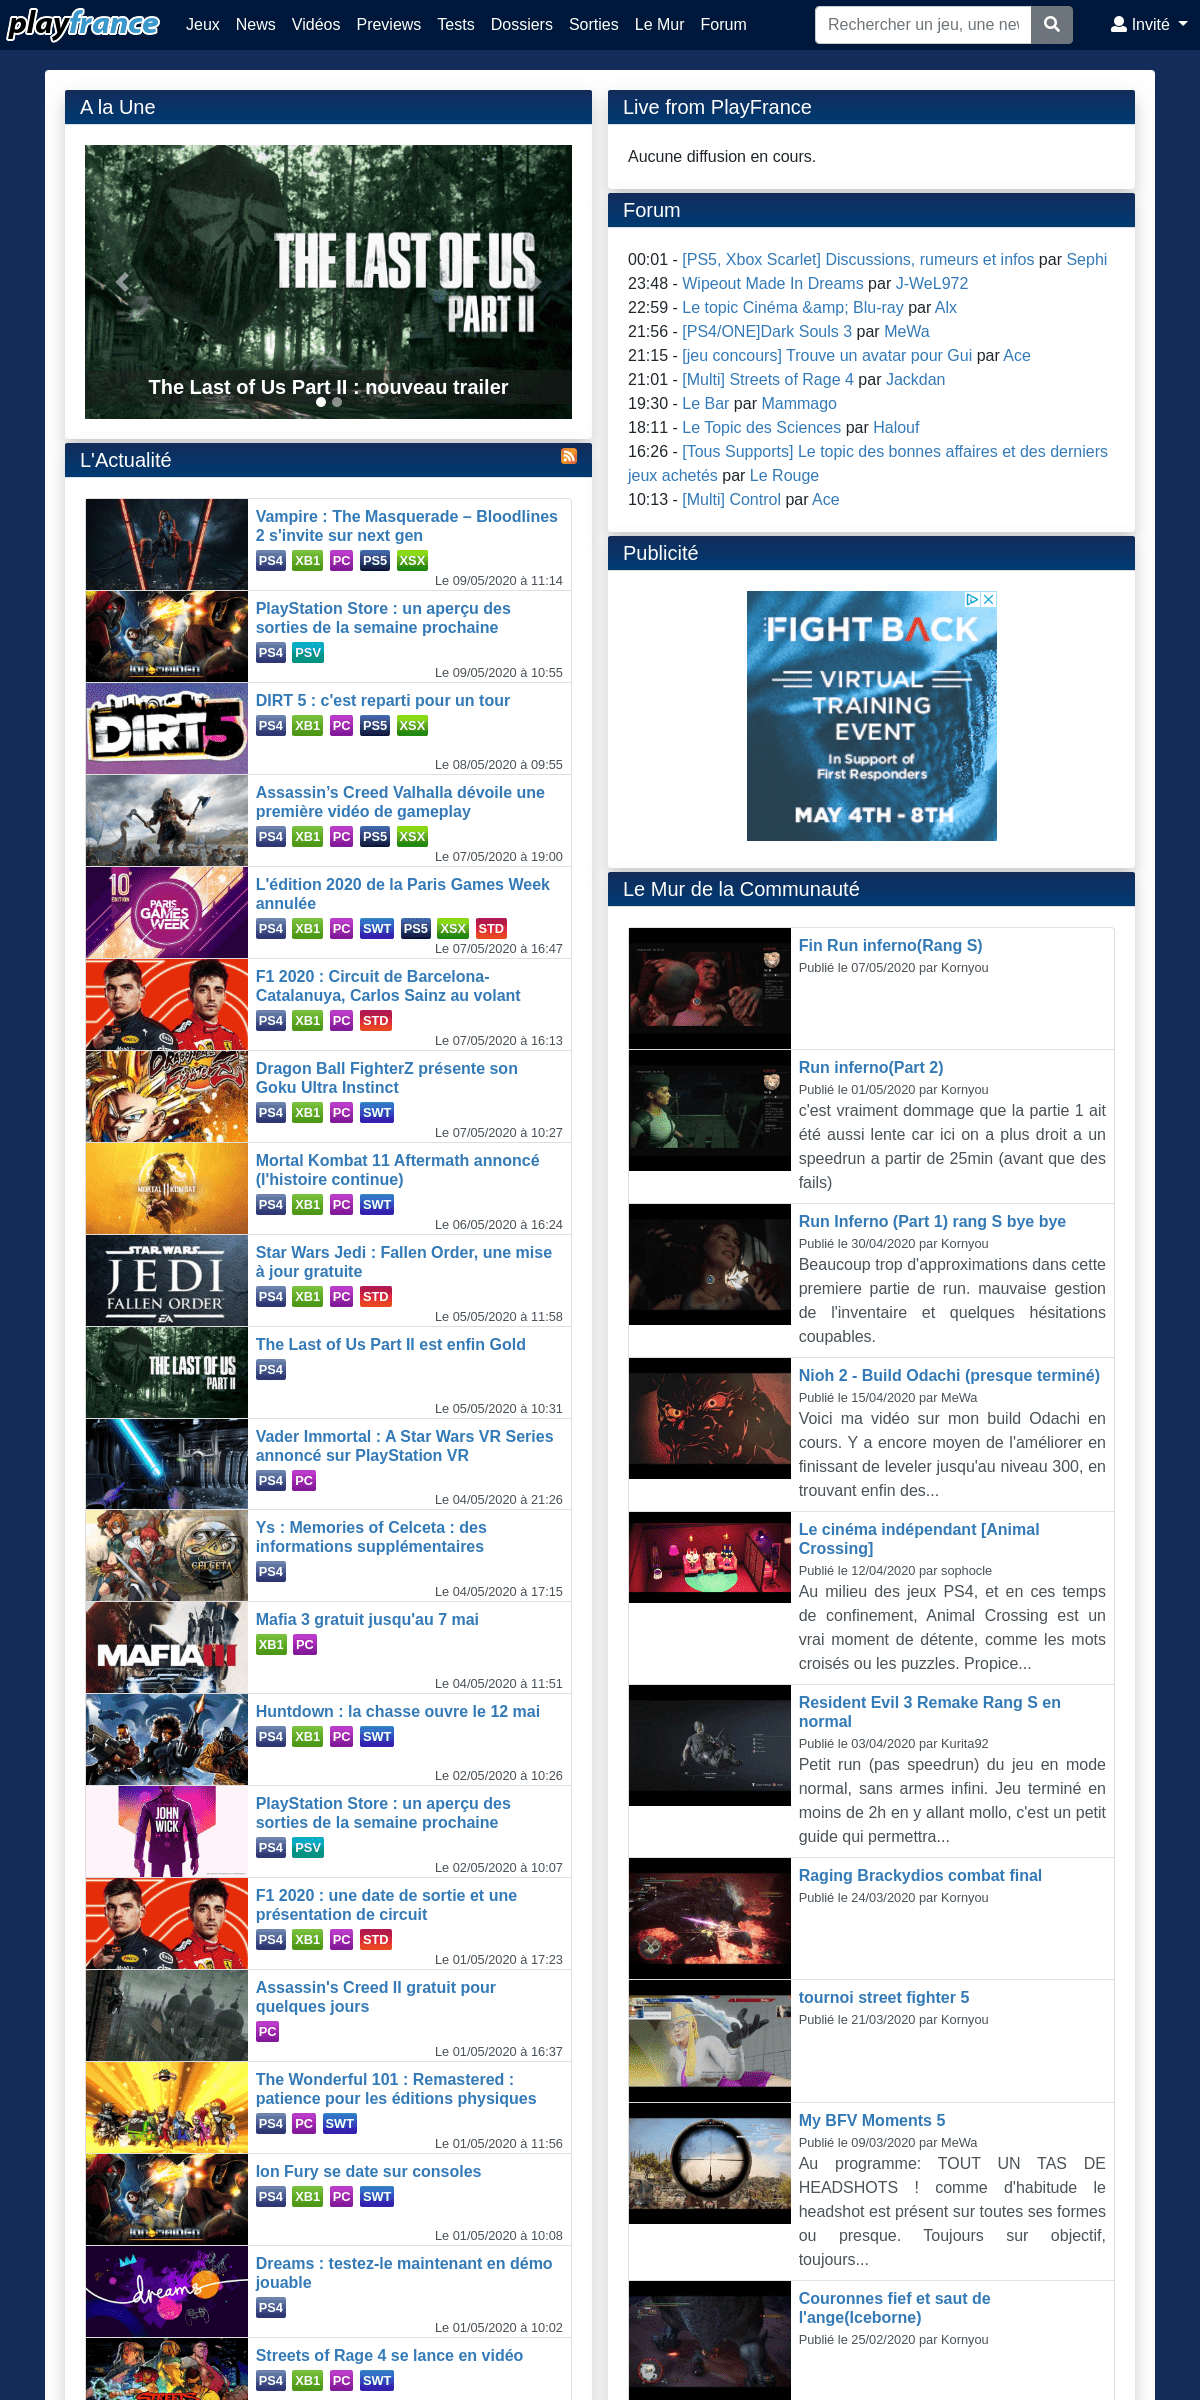 A complete backup of playfrance.com